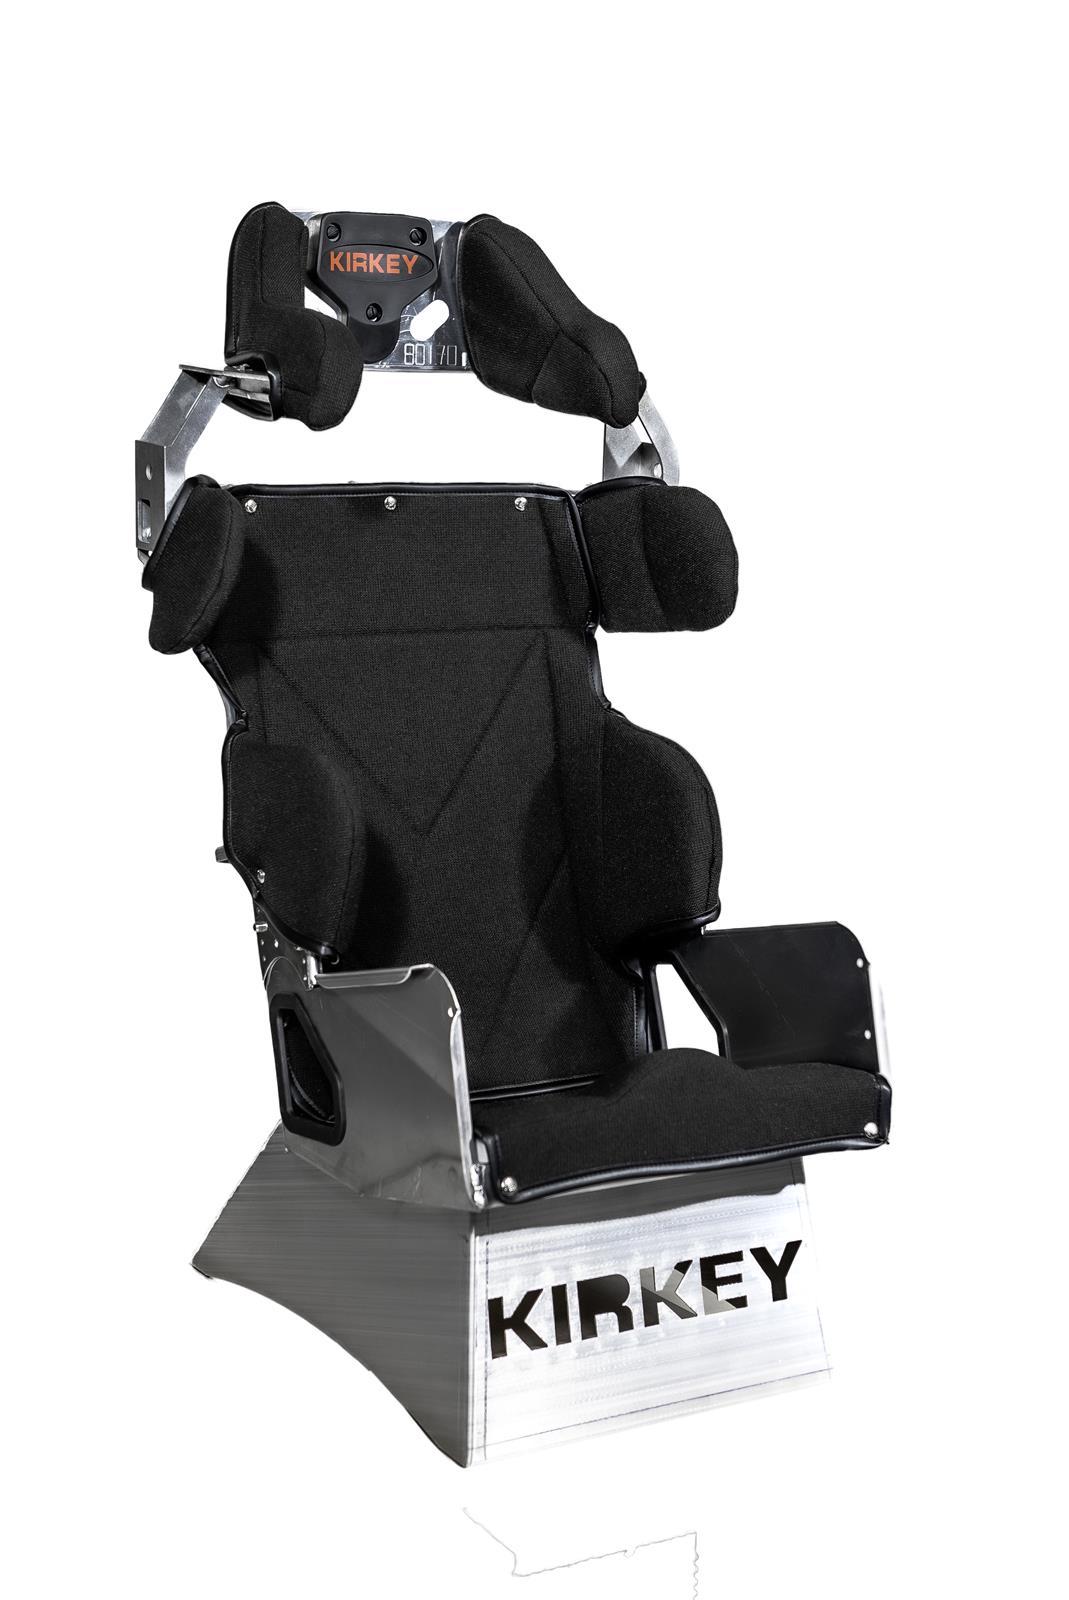 Kirkey Black Cloth Cover For 80185 Seats and Components Seat Covers main image